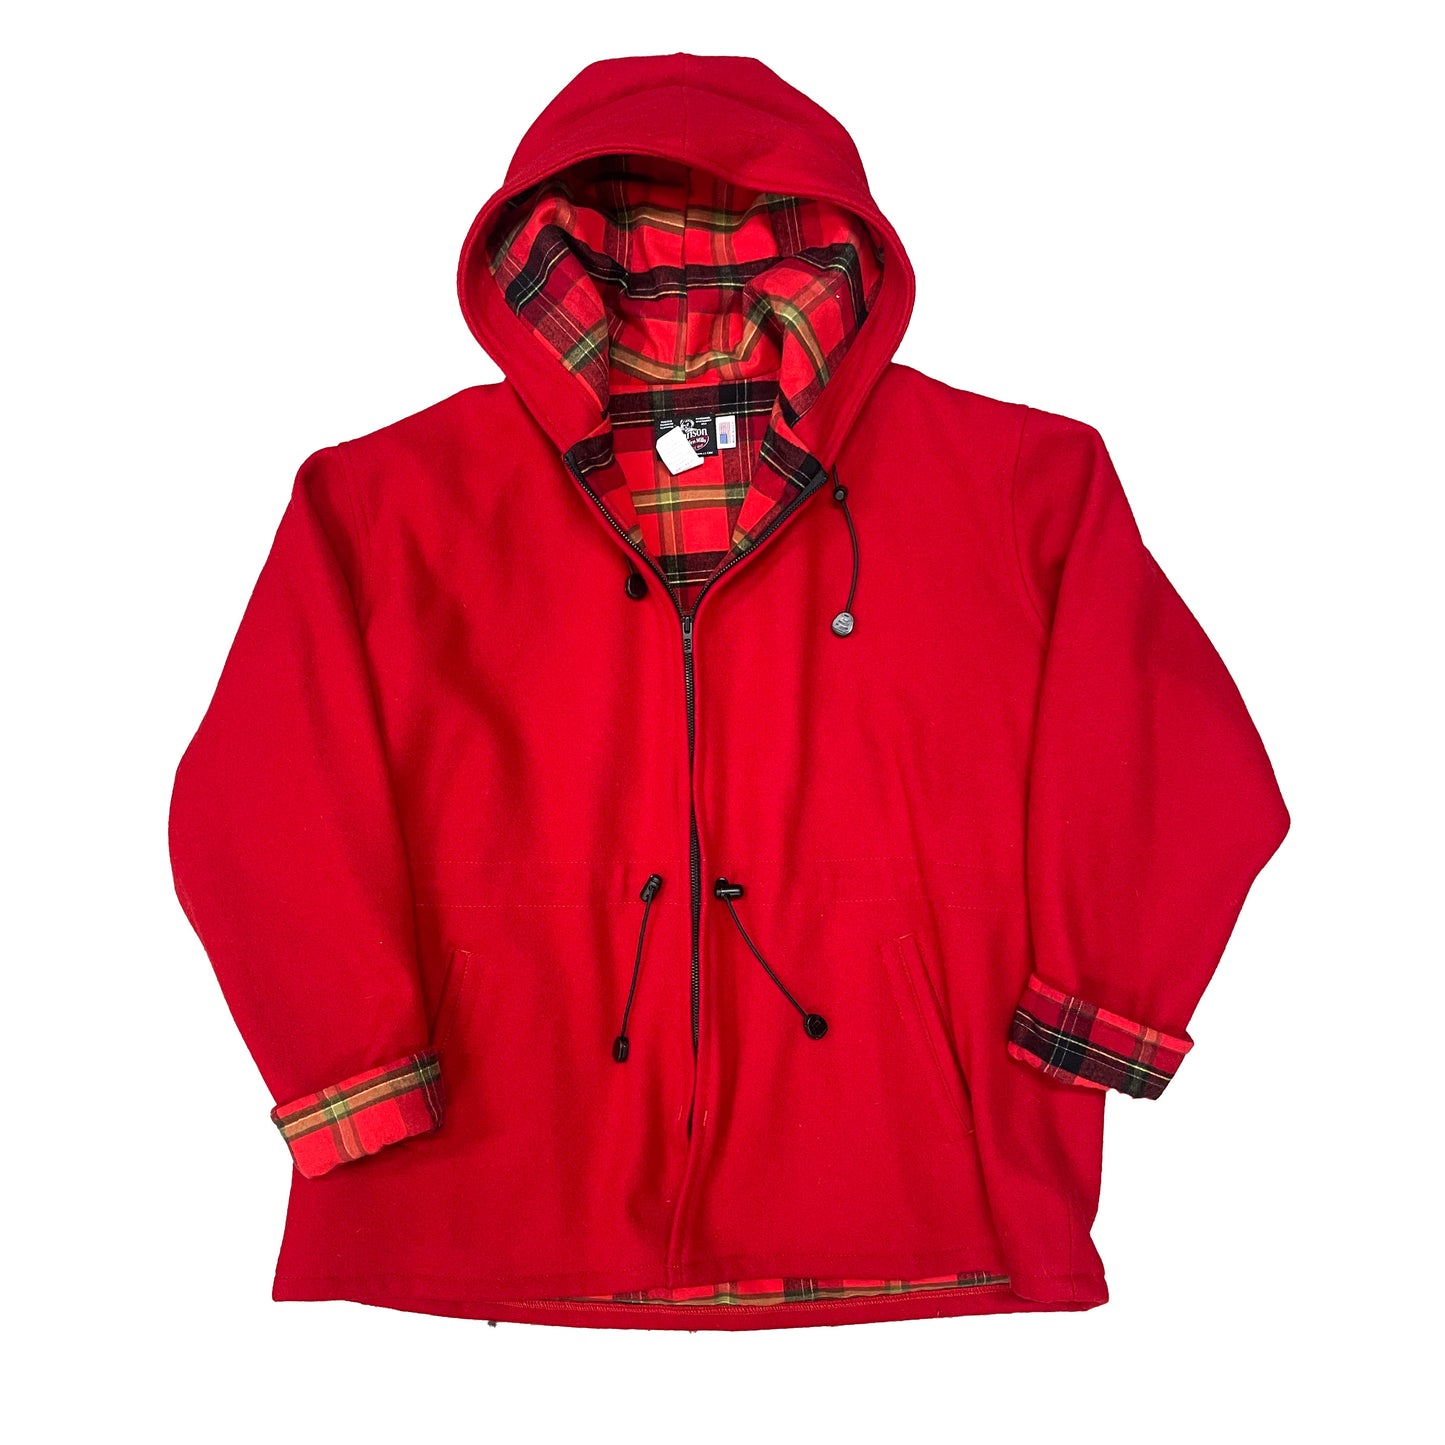 Women's Anorack Wool Jacket Flannel lined bright scarlet front view hood up